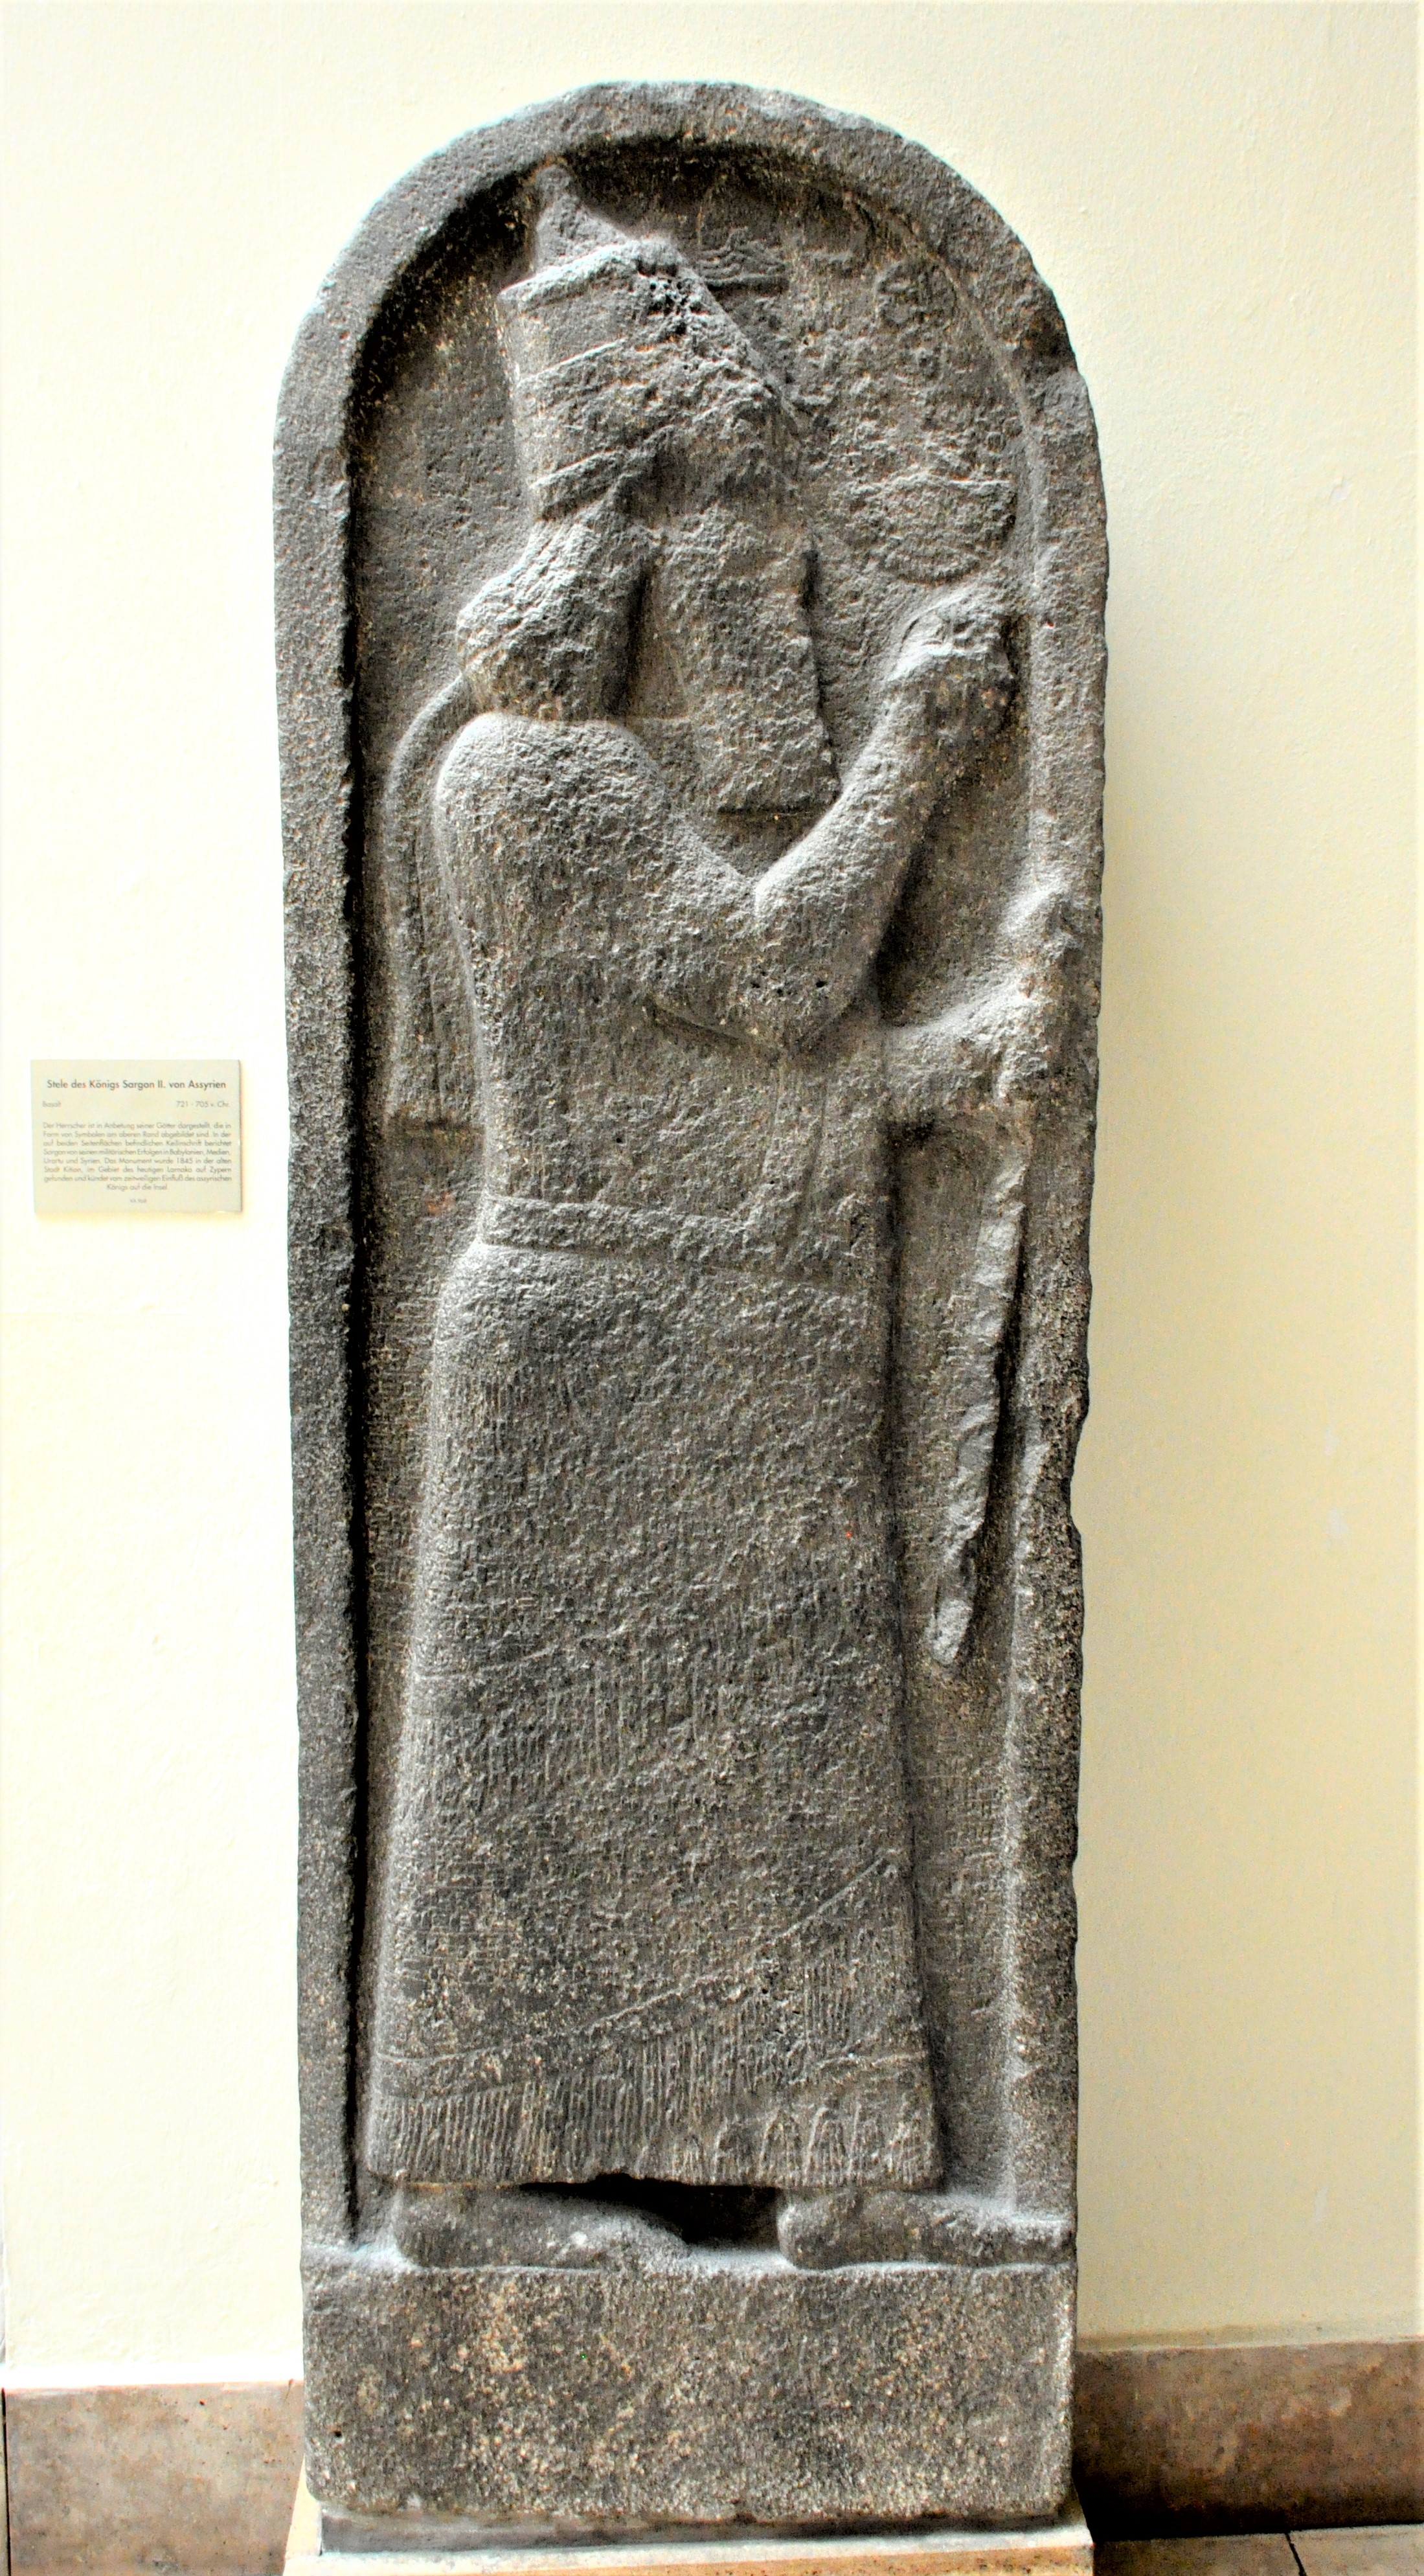 19a - stele of Sargon II, semi-divine giant made king of Assyria by the gods